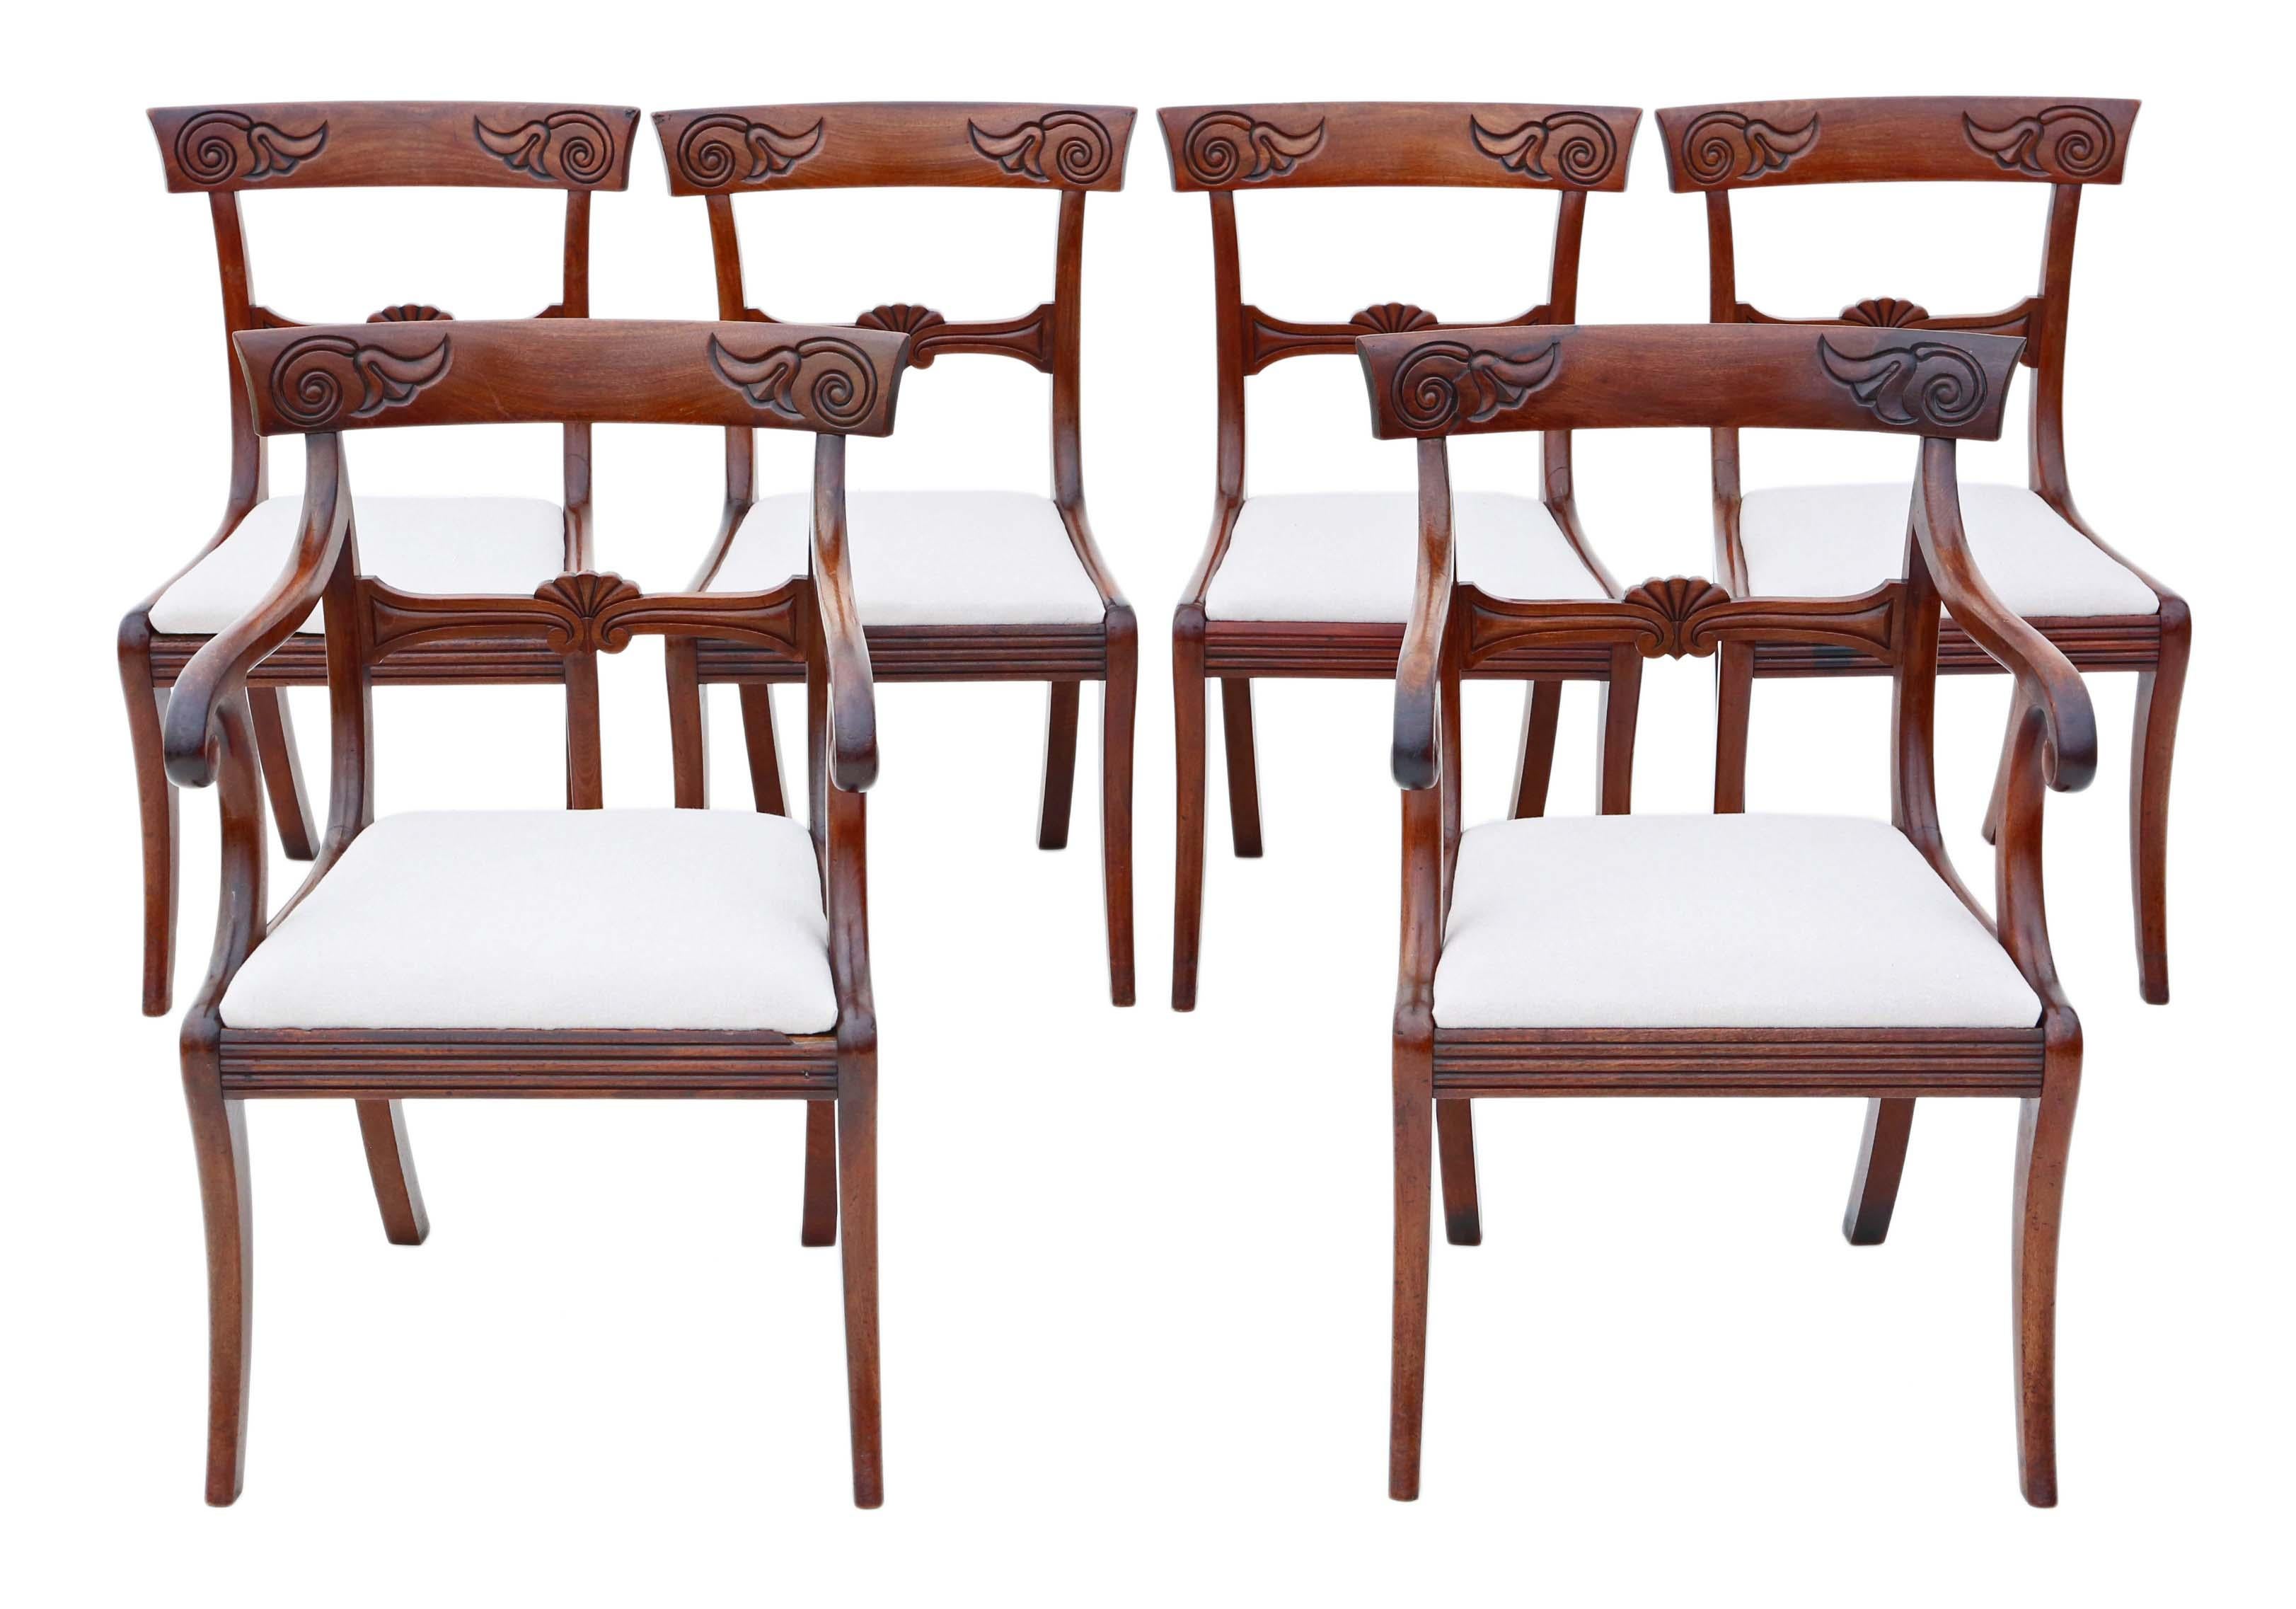 Indulge in the exquisite charm of this fine quality set of 6 (4 + 2) Regency Cuban mahogany dining chairs from the 19th Century, circa 1825. A rare and truly special find, these chairs exude elegance and sophistication.

Crafted with meticulous